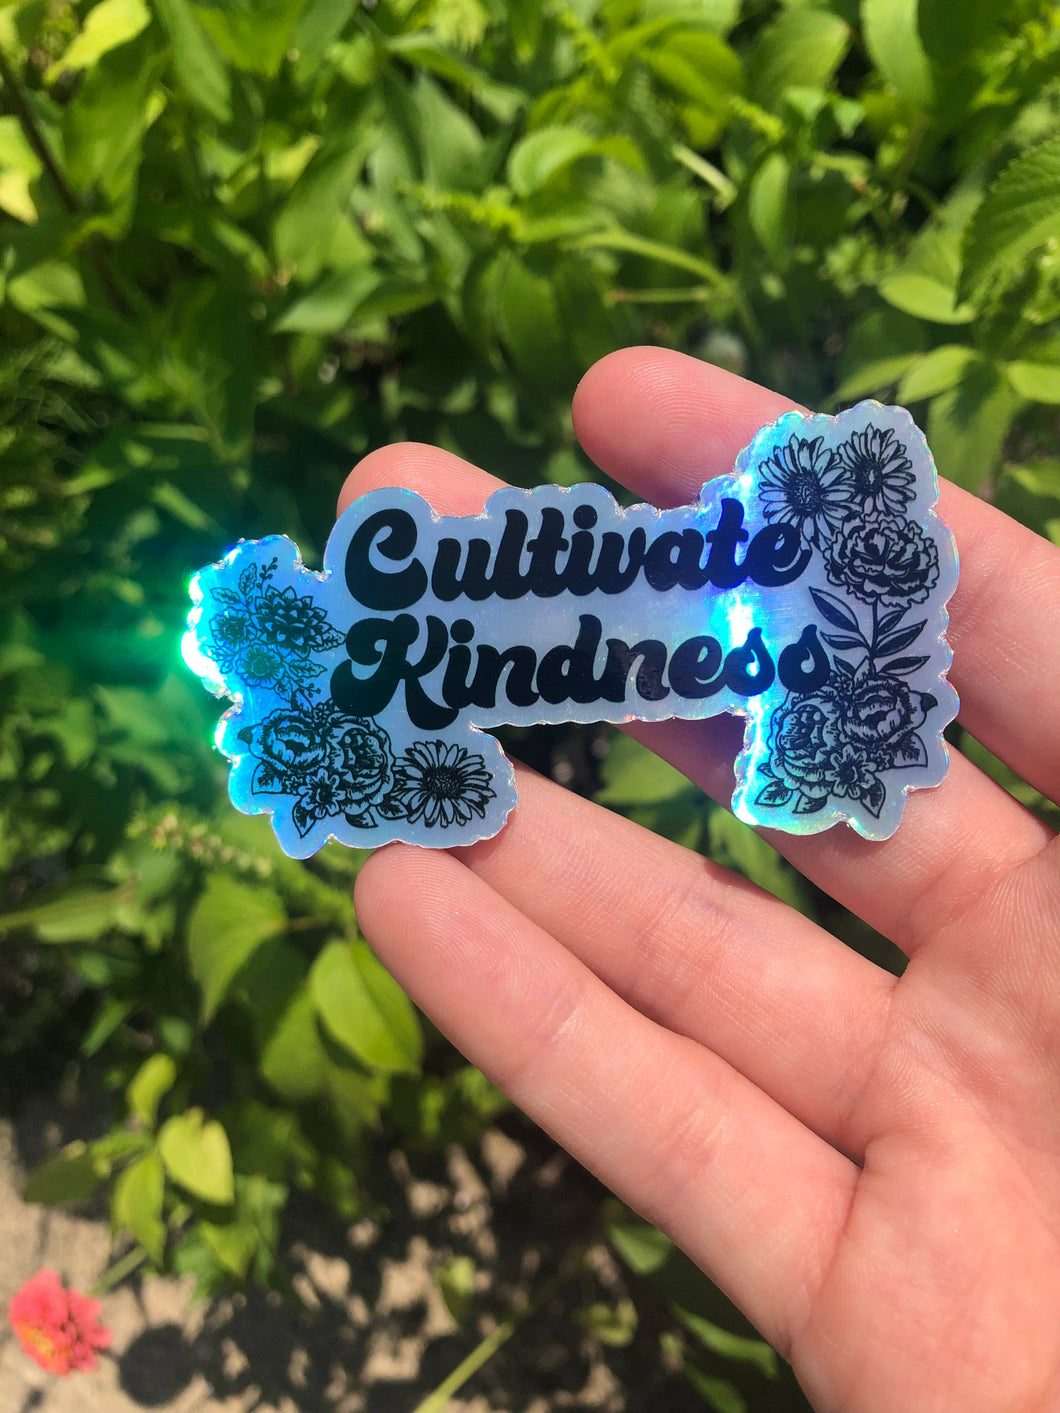 Cultivate Kindness  Holographic Sticker*SHIPS SAME DAY*